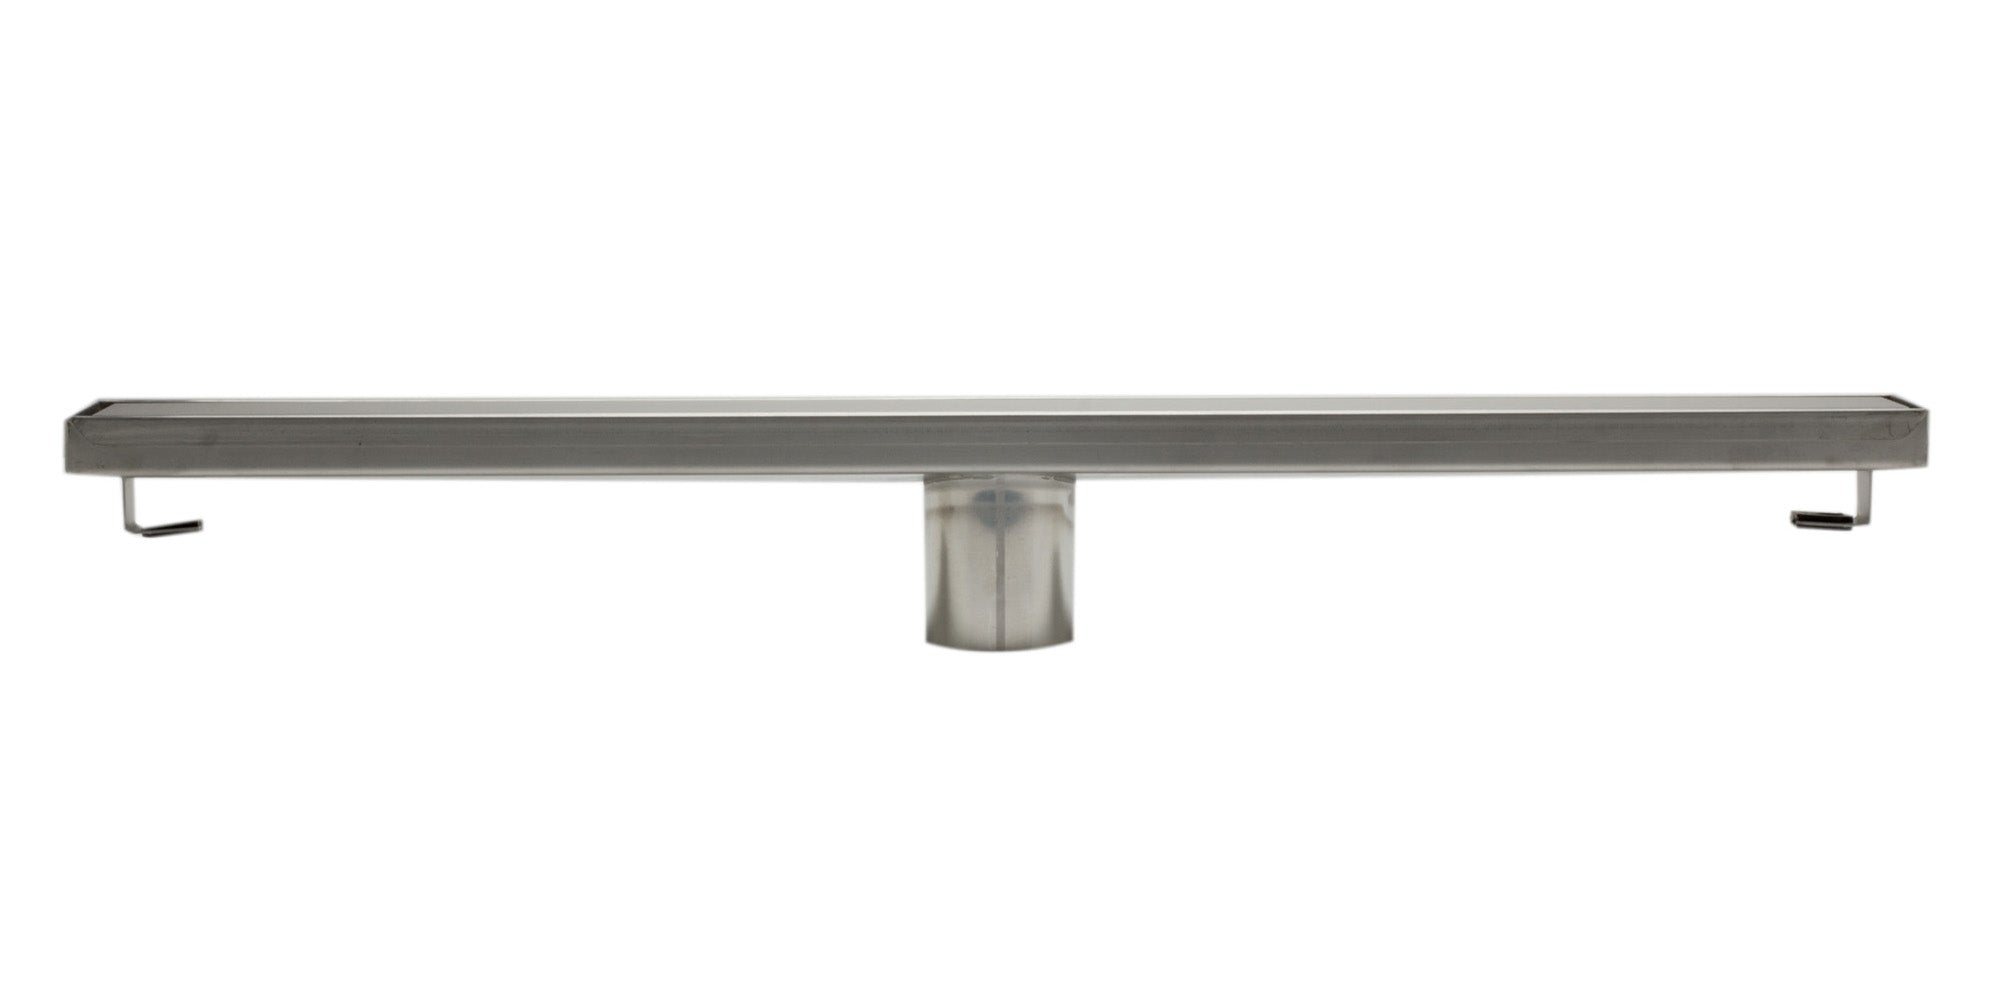 ALFI ABLD24B Modern Linear Shower Drain with Solid Cover (24-inch)